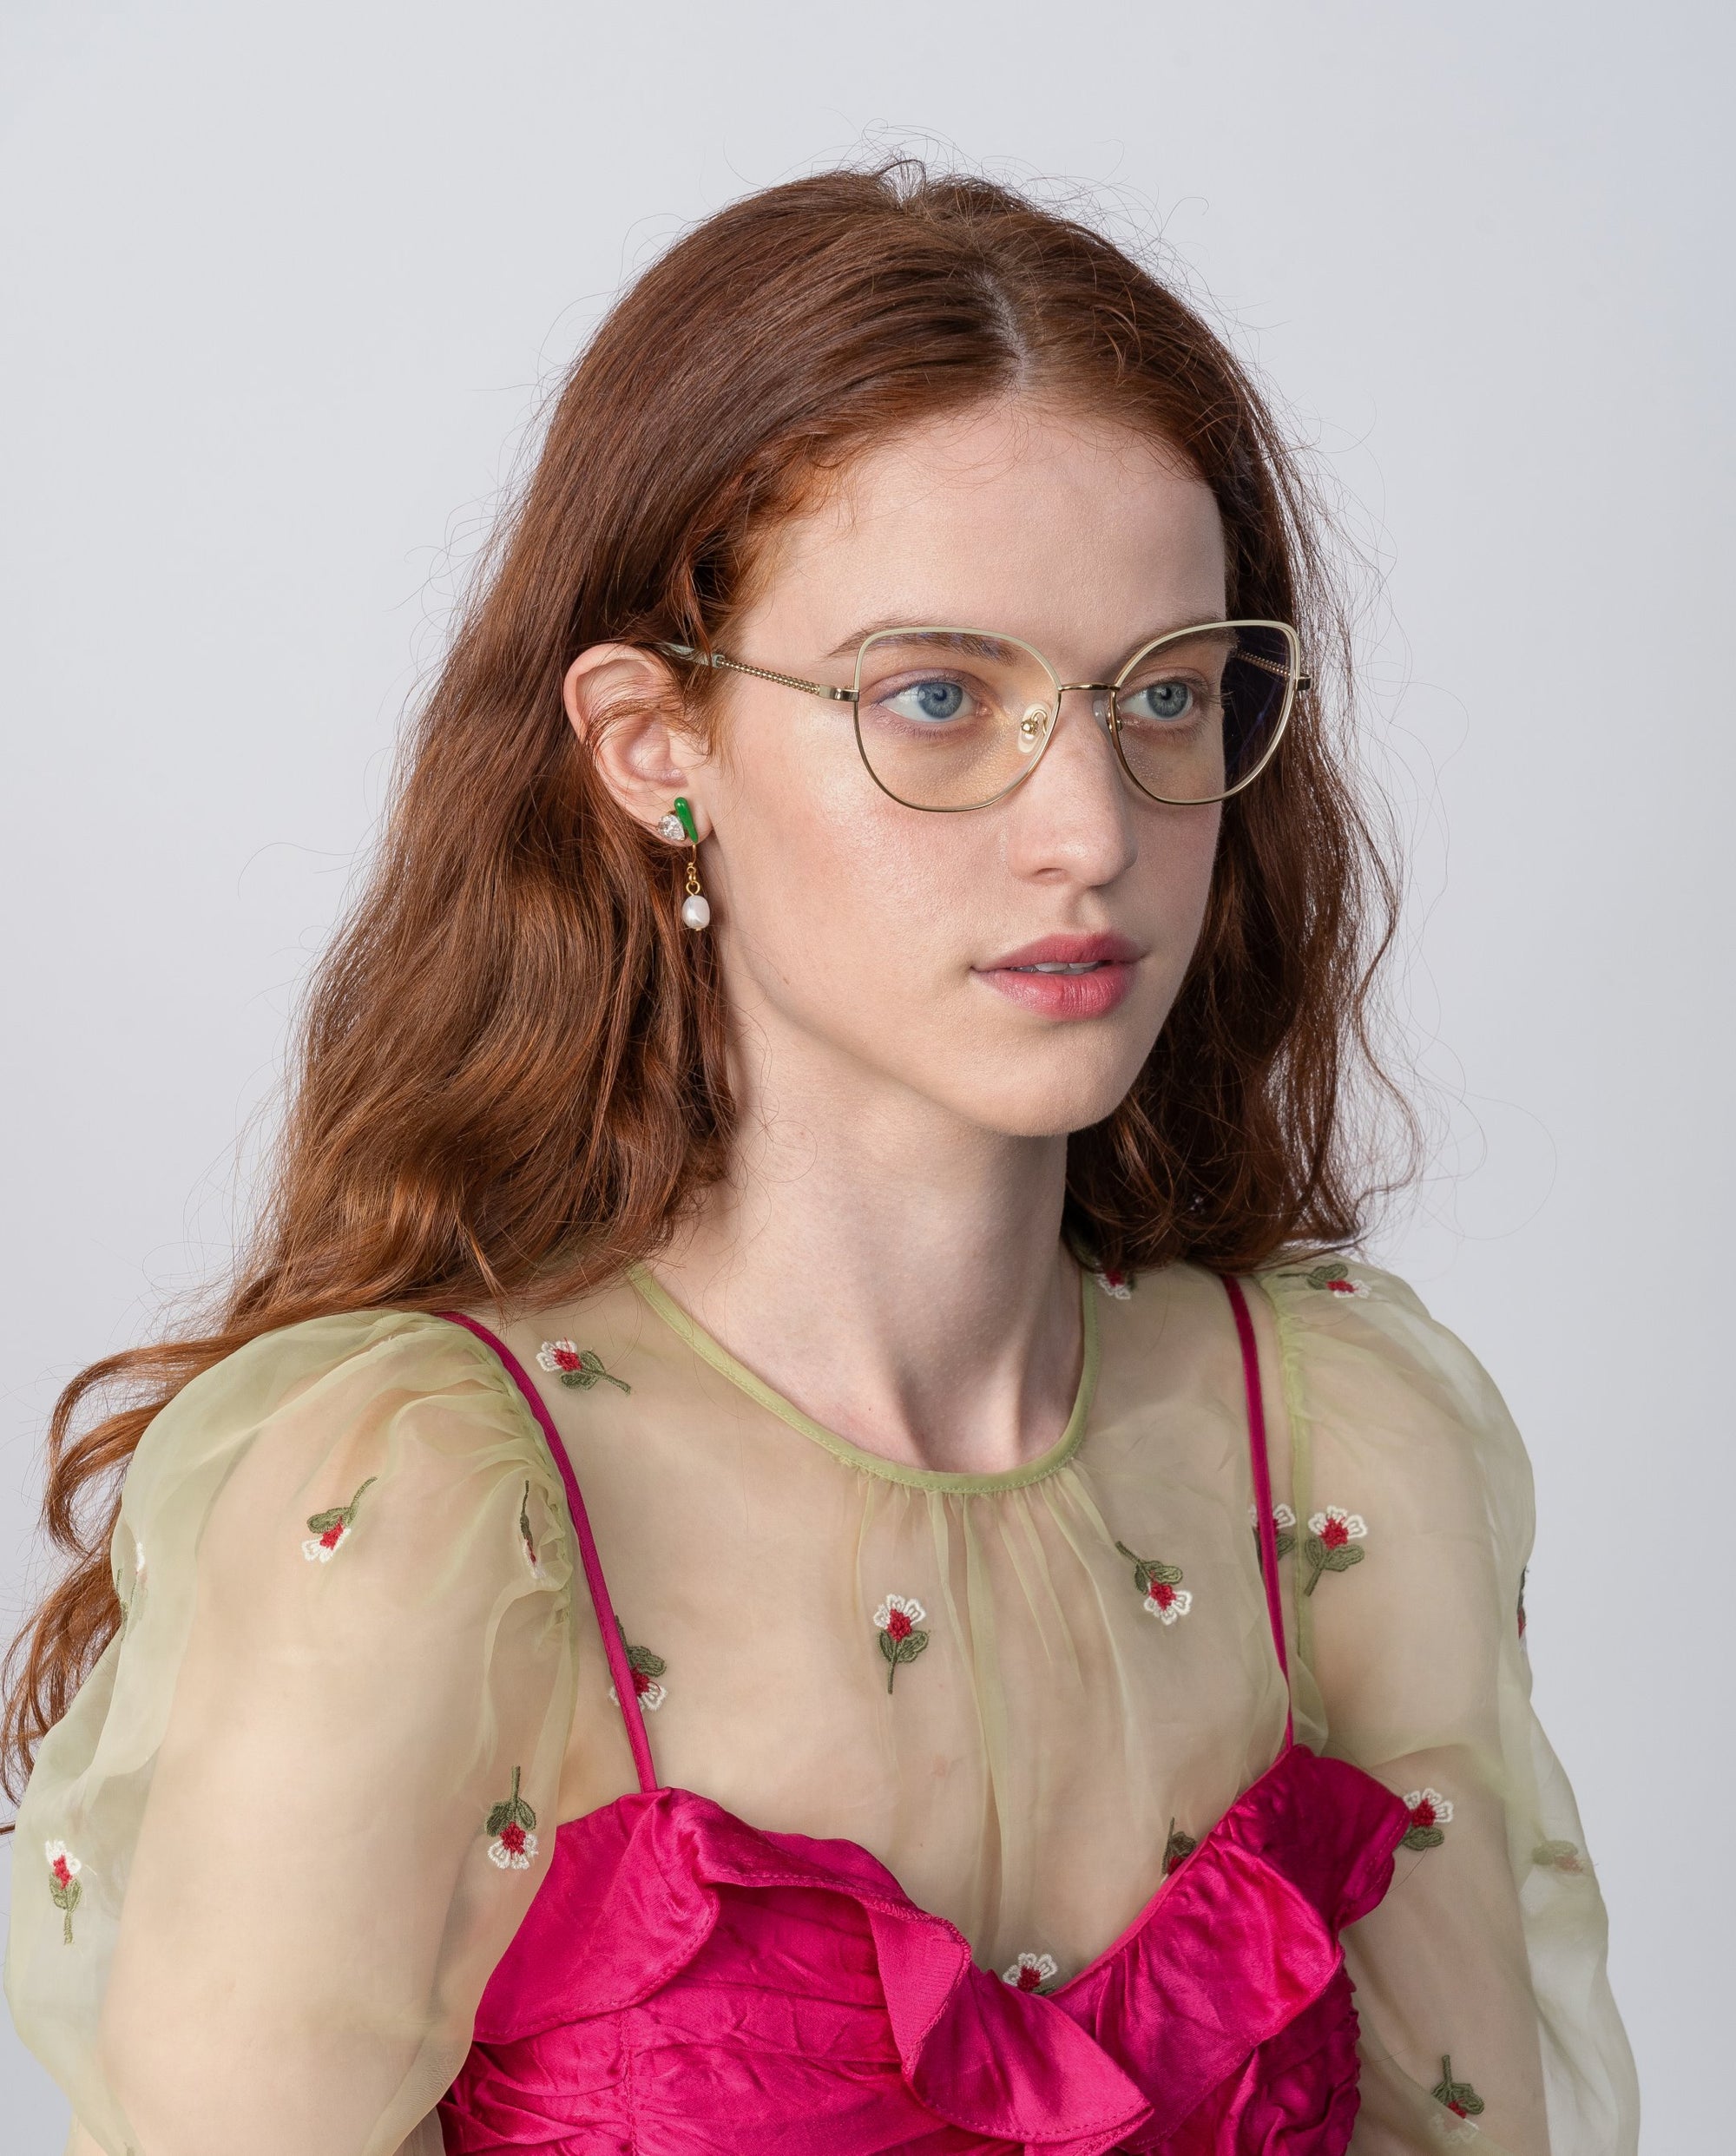 A woman with long, wavy auburn hair and wearing Ophelia glasses by For Art's Sake® is looking slightly to the side. She is dressed in a sheer, green, floral-embroidered top over a bright pink, ruffled dress. The background is plain and light-colored.